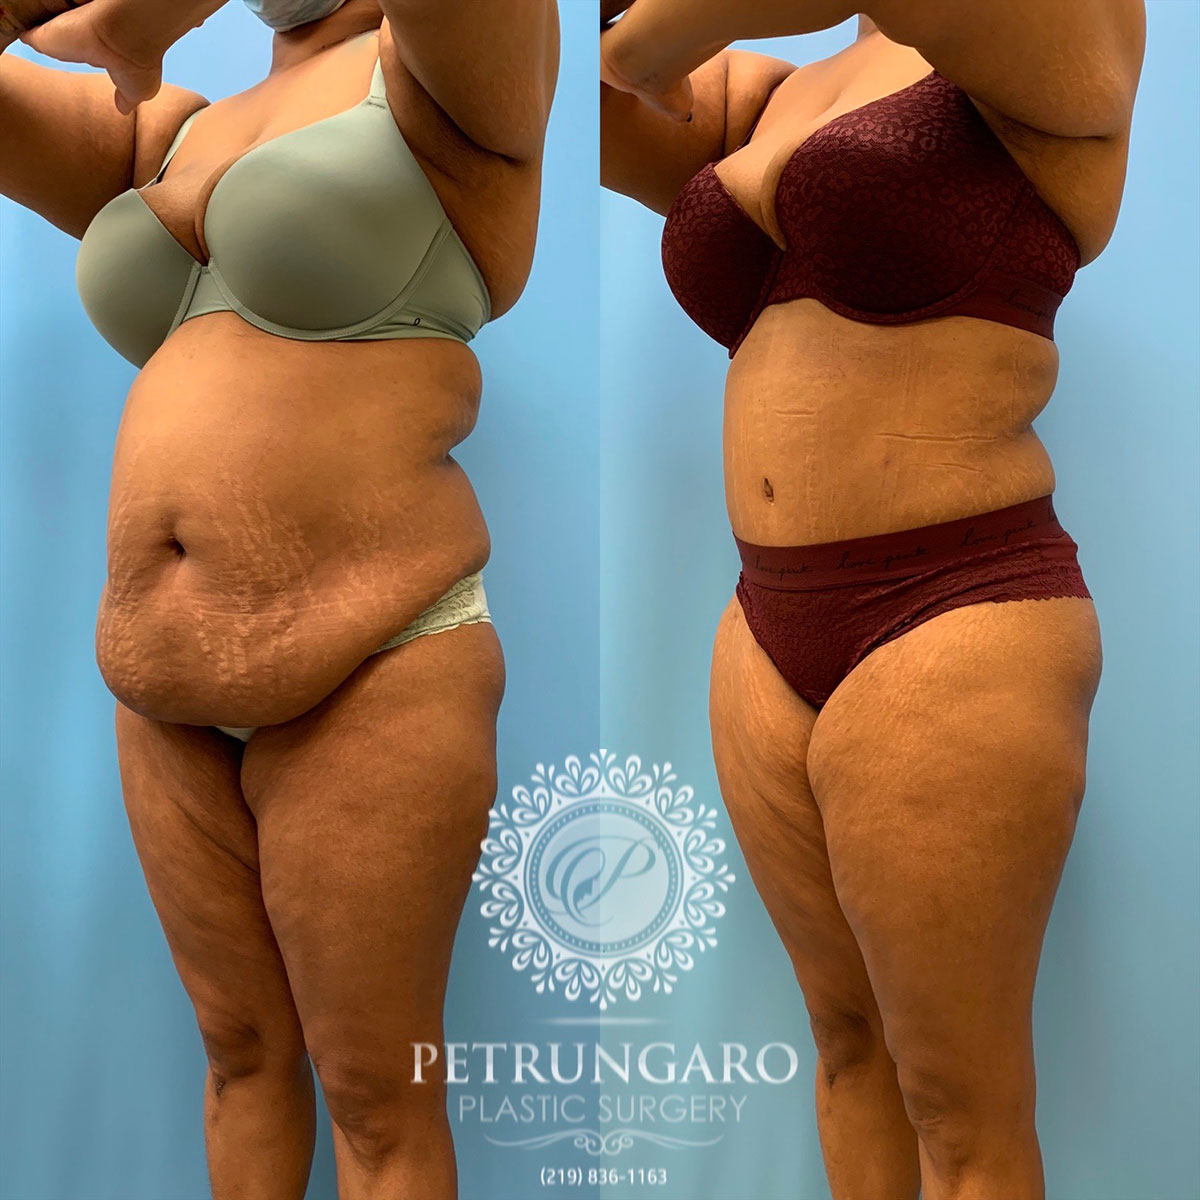 Los Angeles Liposuction Centers on X: Female patient 5 weeks after her  Full Tummy Tuck with Smartlipo 360. Amazing results all with local  anesthesia! Procedure performed by H. Mirzania, MD. #fulltummytuck # tummytuck #